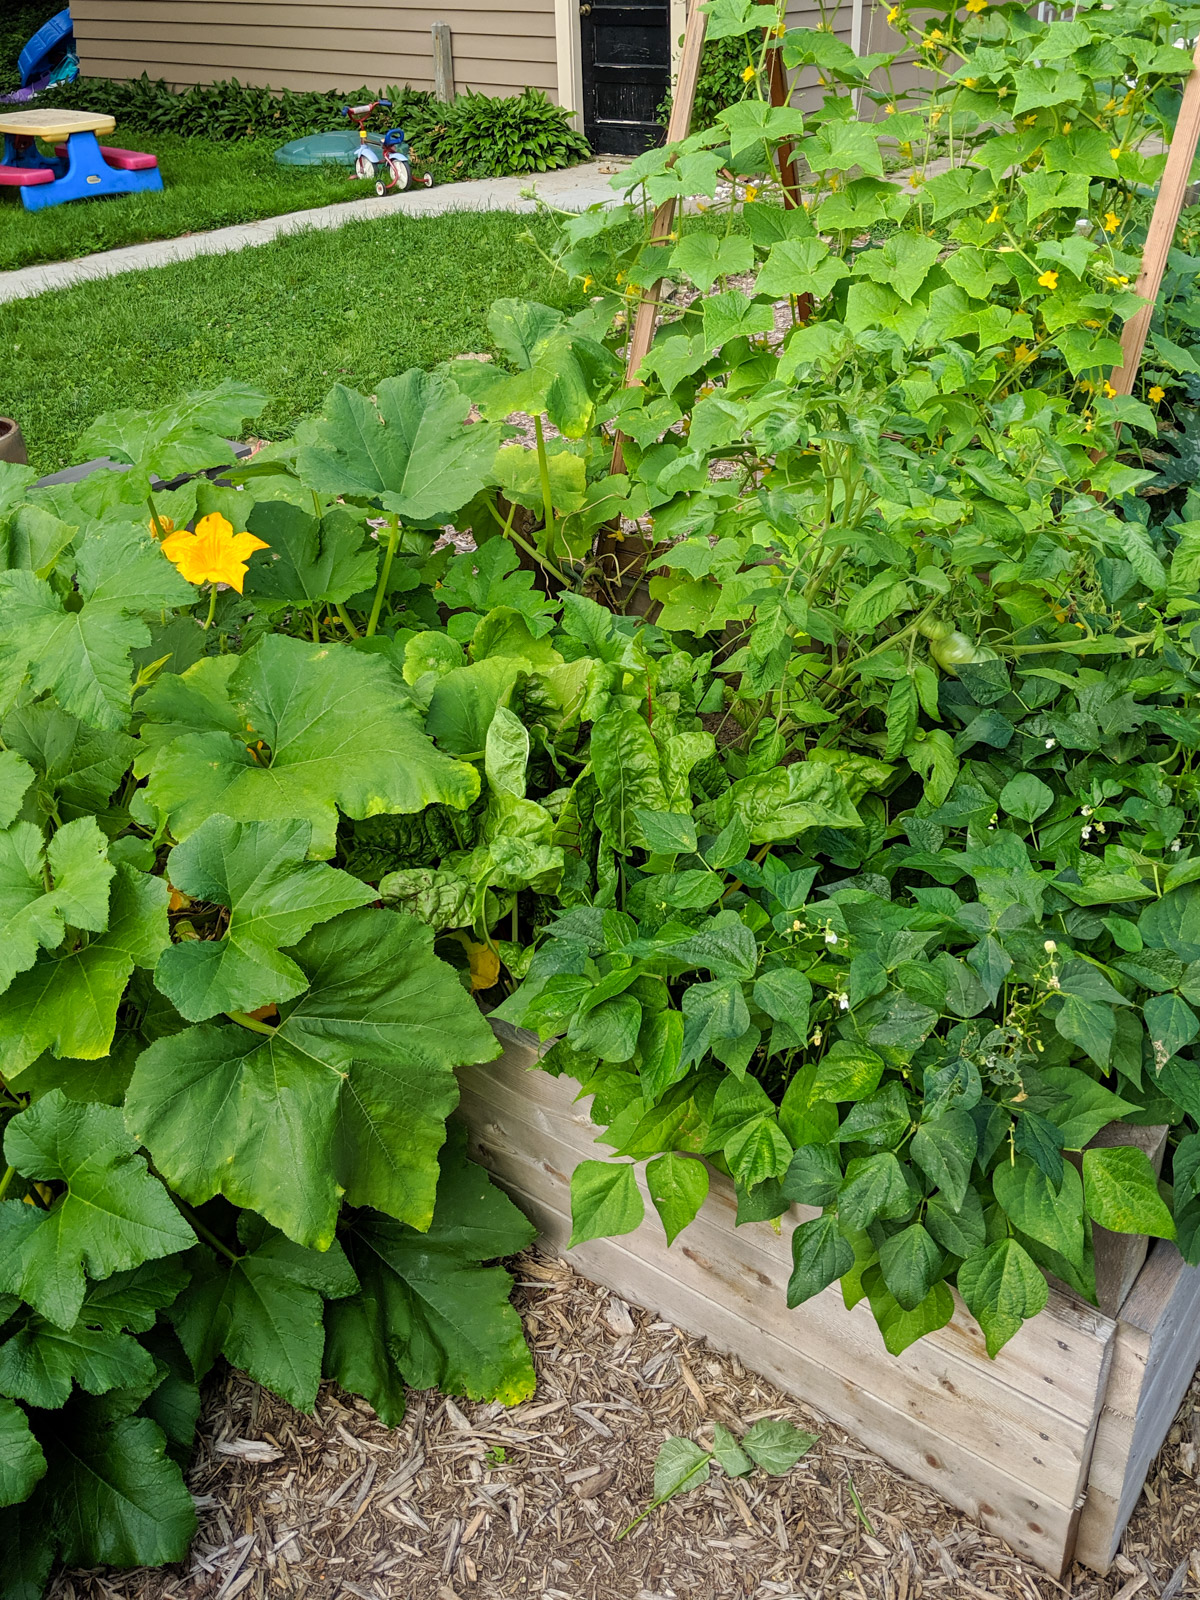 Large squash, cucumber and green bean plants overgrowing their raised bed garden.